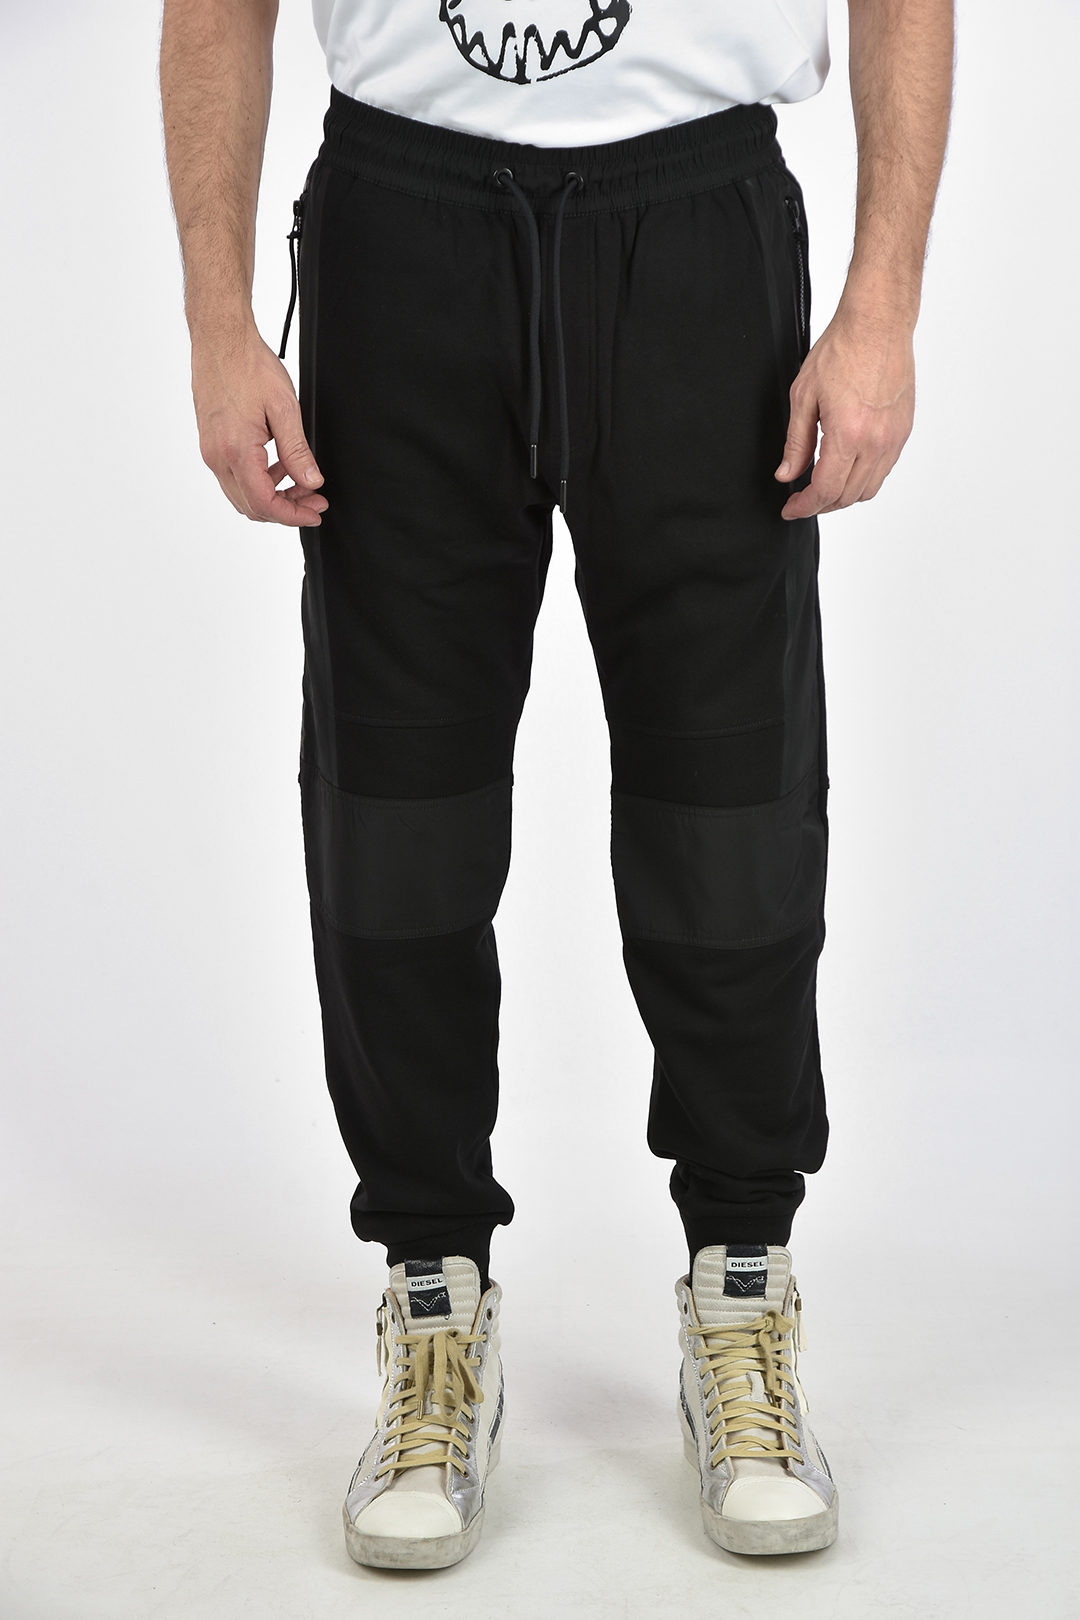 Diesel Side Piping P-RYAN Jogger Pants men - Glamood Outlet